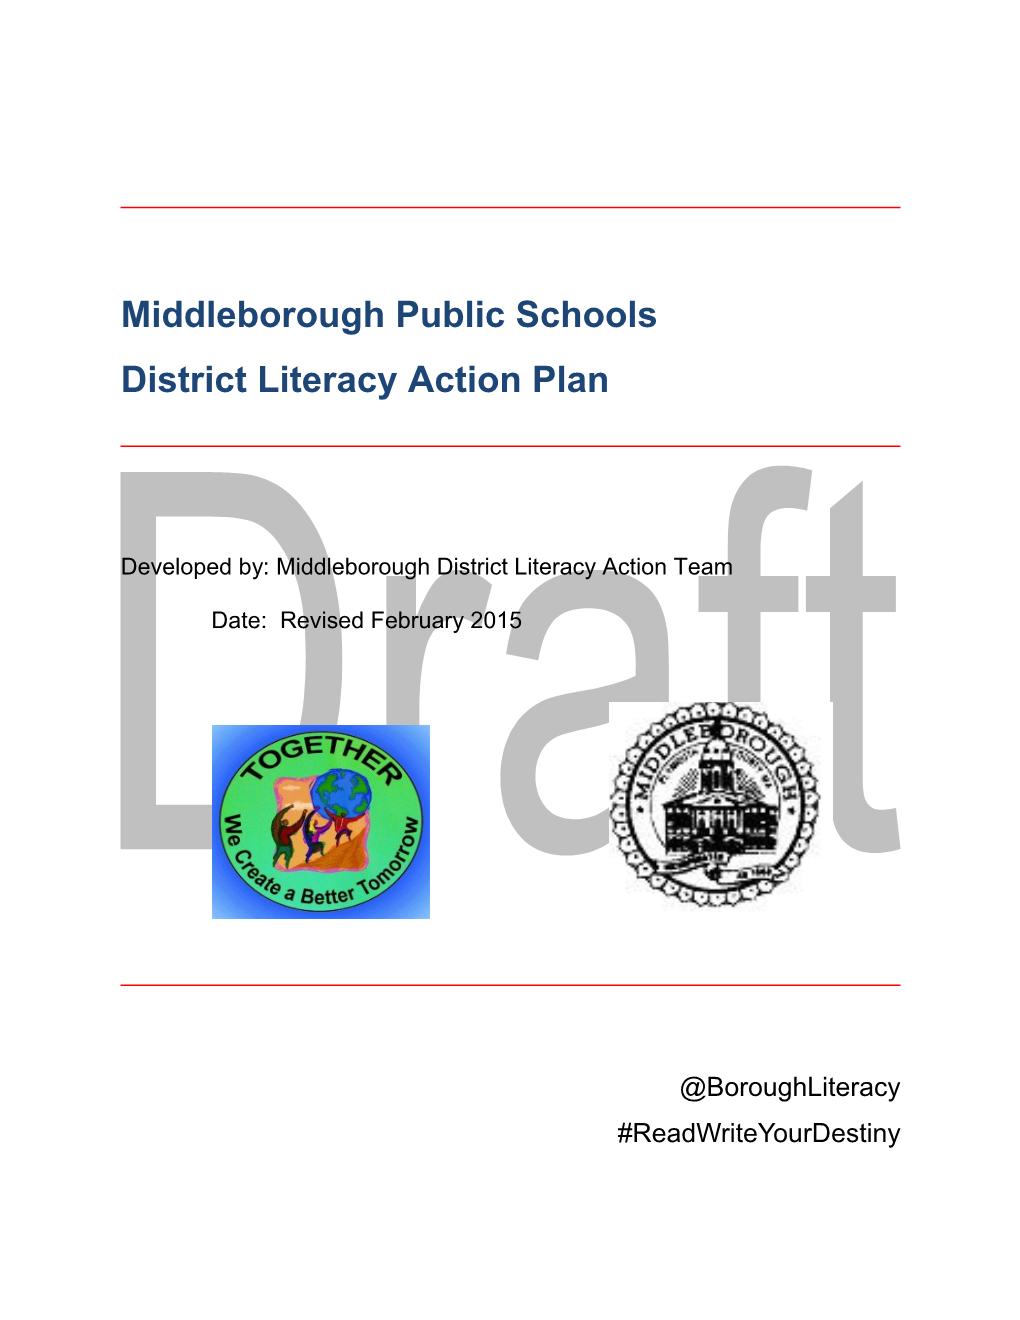 Guidelines for Developing an Effective District Literacy Action Plan